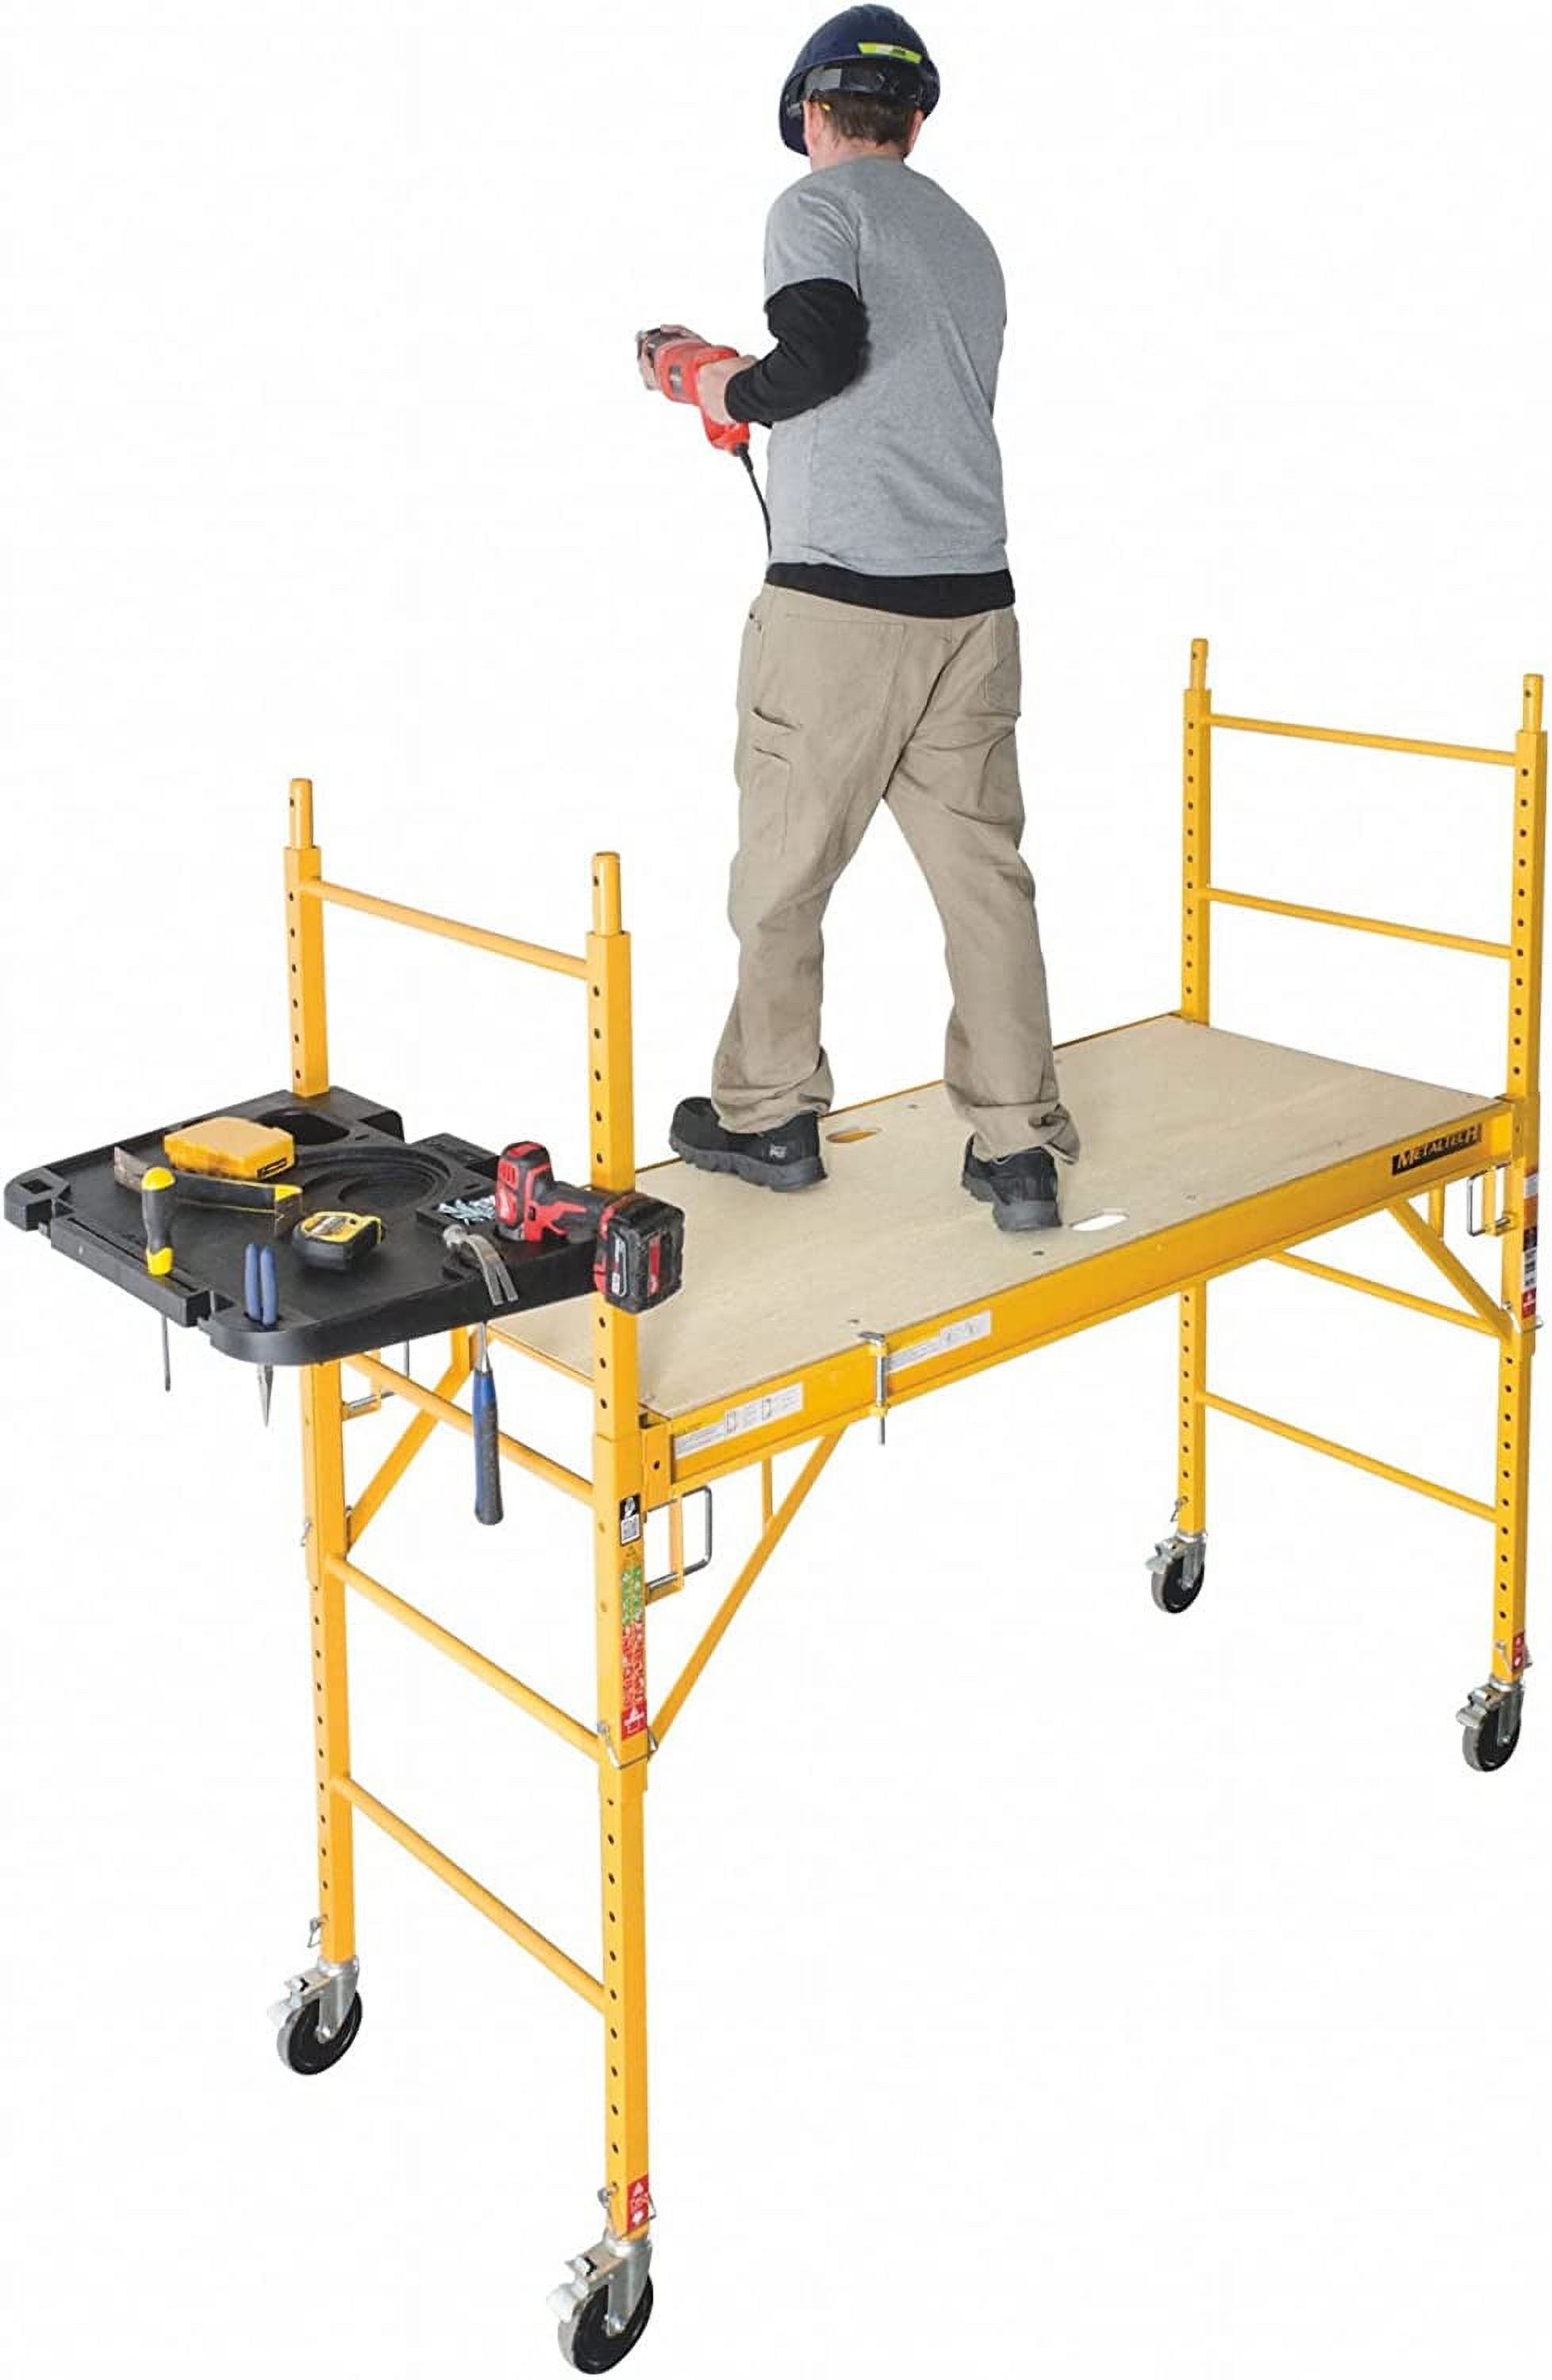 MetalTech 6 Foot Portable Jobsite Series Baker Scaffolding with Locking Wheels - image 3 of 7